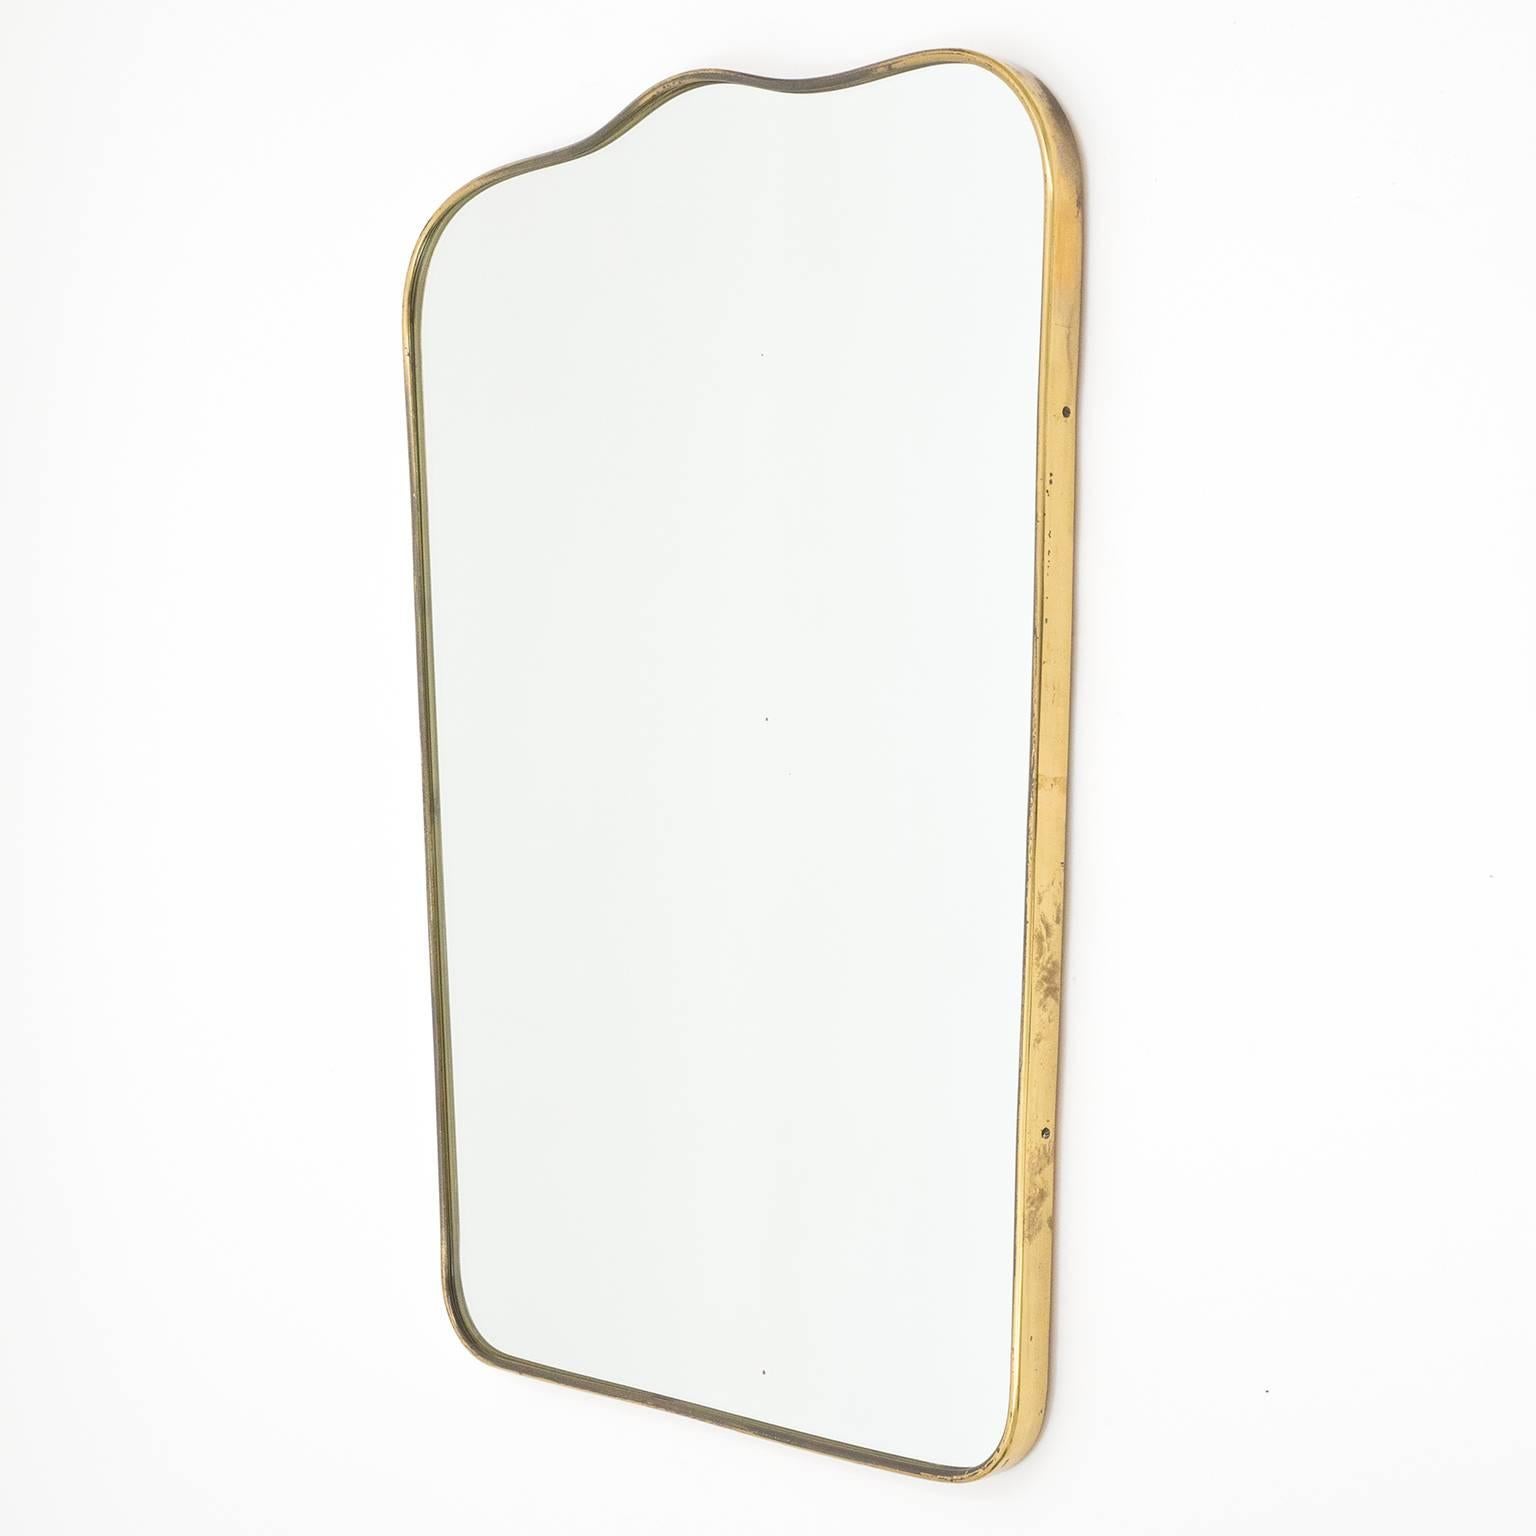 Elegant Gio Ponti style brass mirror from the 1950s. Has a nice patina on the brass and a few minor age-related specks in the mirror. Measuring width on the bottom is 18.5inches/47cm.